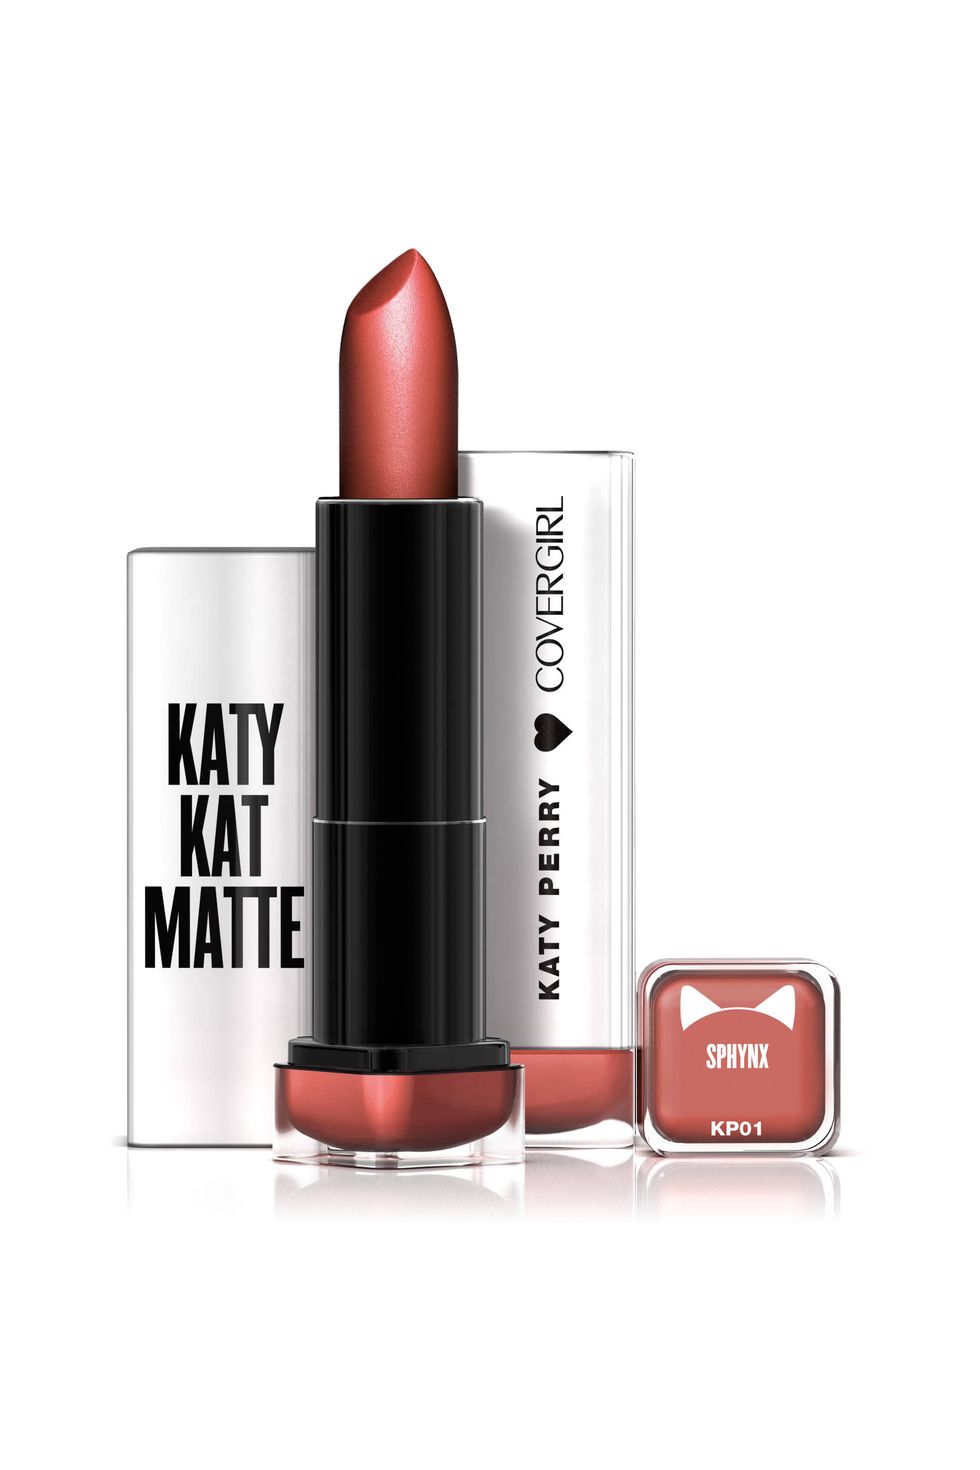 <p>Don't let the name fool you, Katy Kat mattes are multi-dimensional and&nbsp;moisturizing enough to apply without balm underneath. If like me, your natural lip color skews popsicle red, Sphynx is the ultimate your-lips-but-better toned-down shade.&nbsp;— Julie Schott, Senior Beauty Editor</p><p><em data-redactor-tag="em" data-verified="redactor">CoverGirl Katy Kat Matte in Sphynx, $7;&nbsp;</em><a href="http://www.walmart.com/ip/COVERGIRL-Katy-Kat-Matte-Lipstick-Sphynx-.12-oz-created-by-Katy-Perry/50275605" target="_blank"><em data-redactor-tag="em" data-verified="redactor">walmart.com</em></a></p>